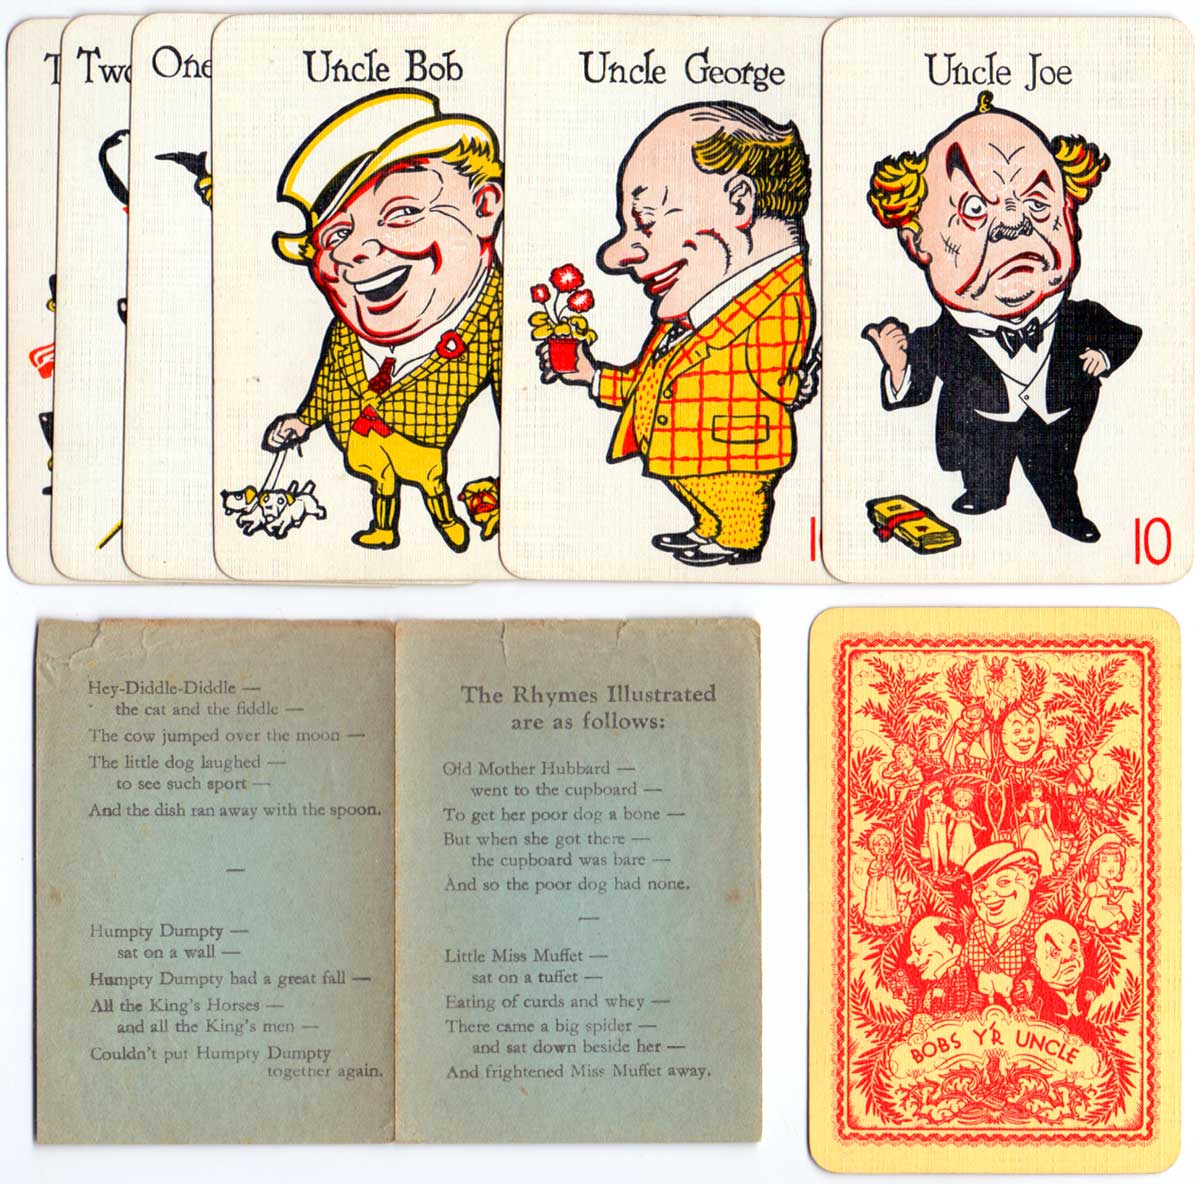 “Bobs y'r Uncle” children’s card game designed by Frank H. Simpson for John Waddington Ltd. in 1935